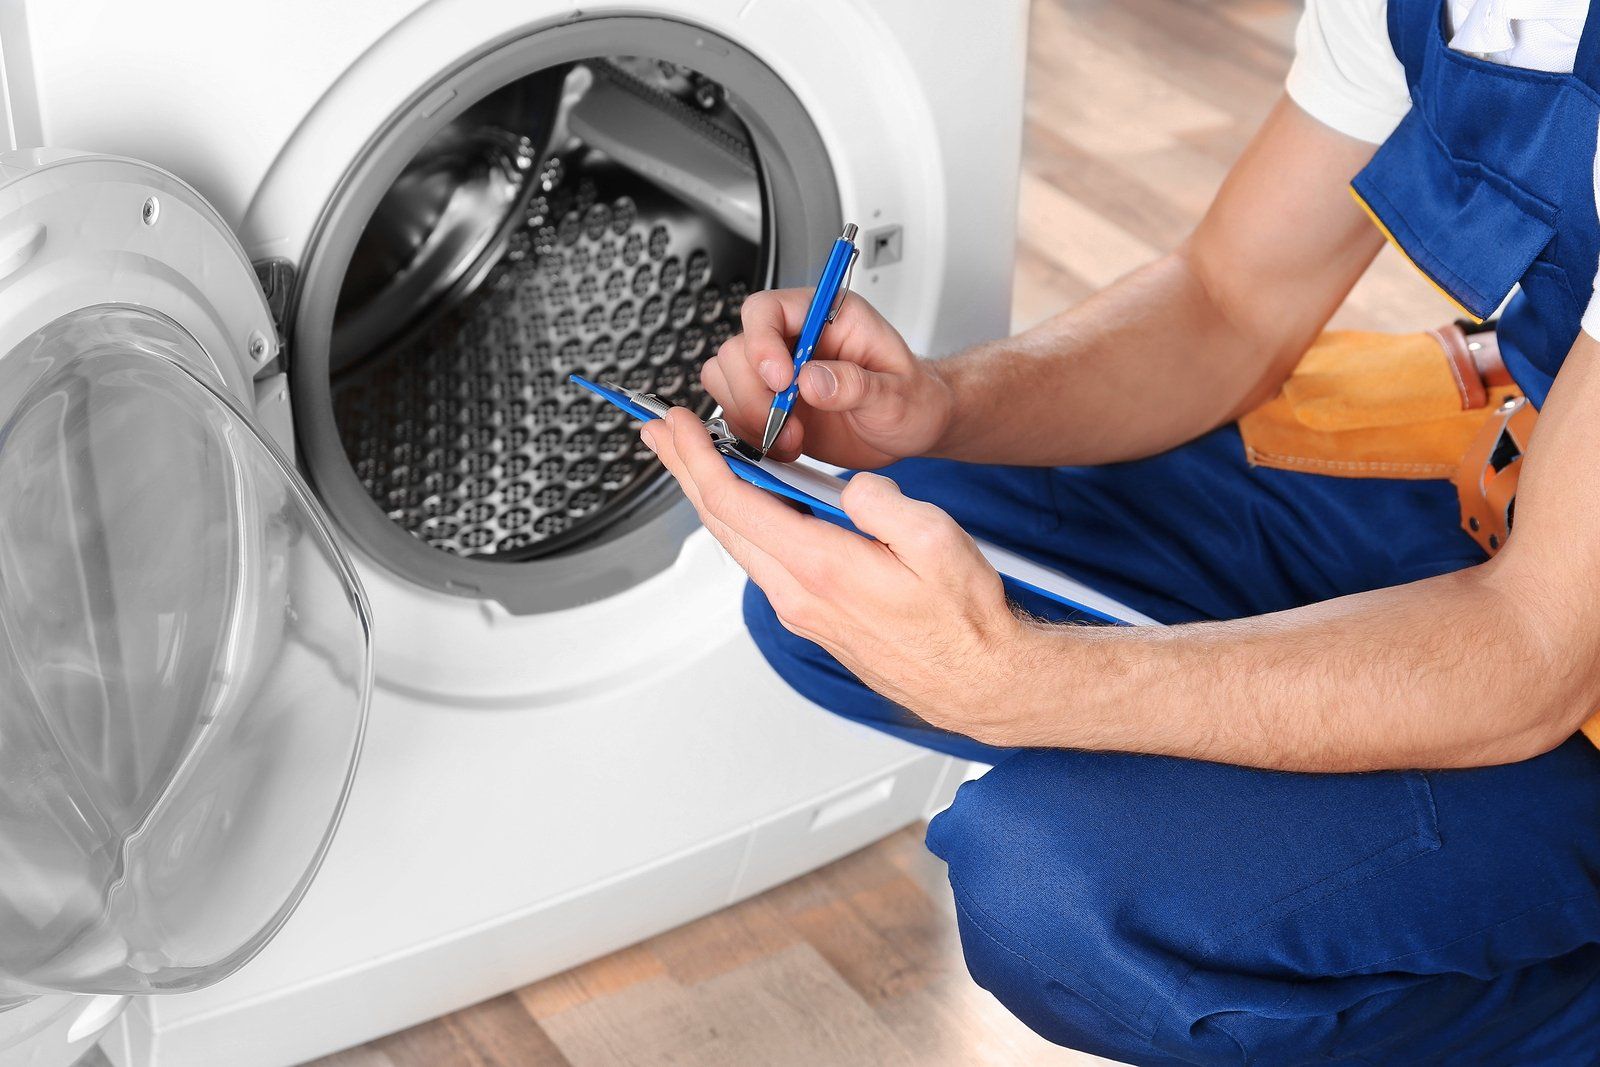 a man is kneeling down in front of a washing machine and writing on a clipboard .